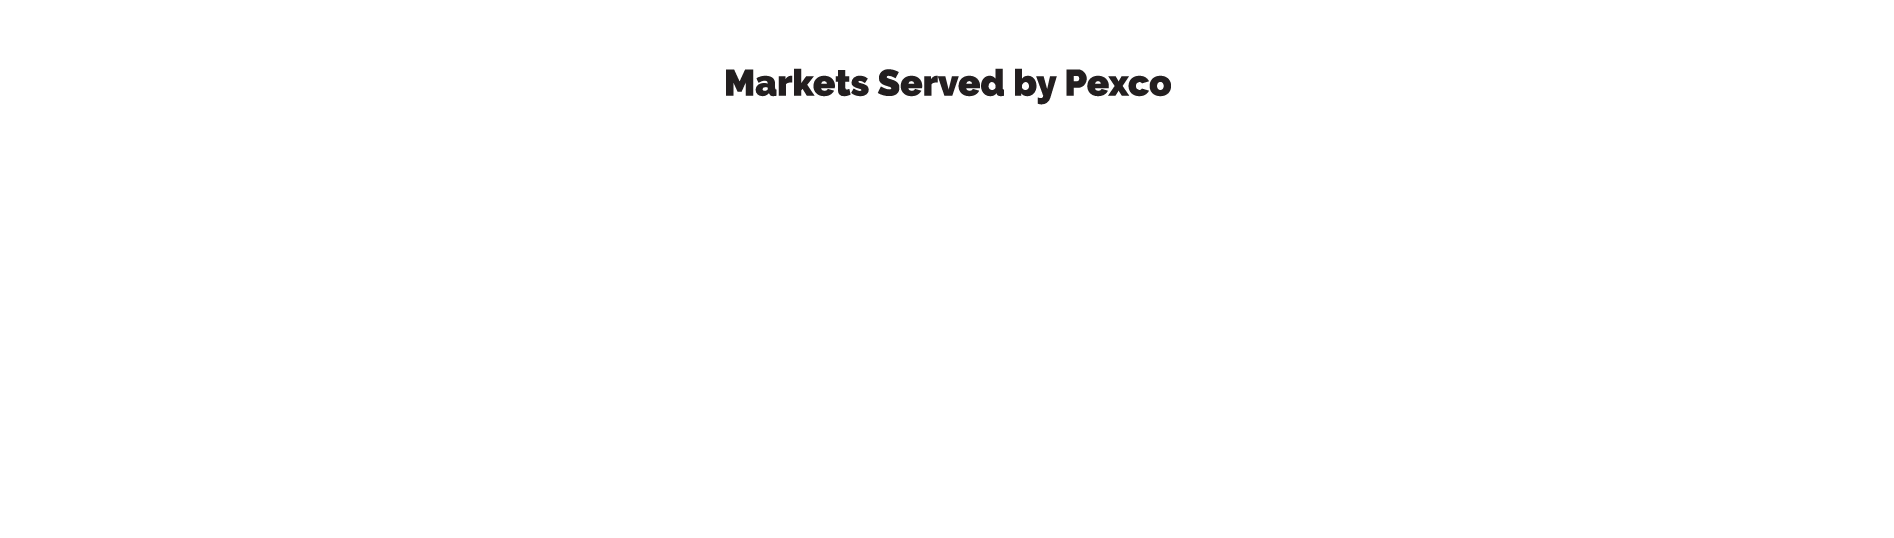 Markets Served by Pexco